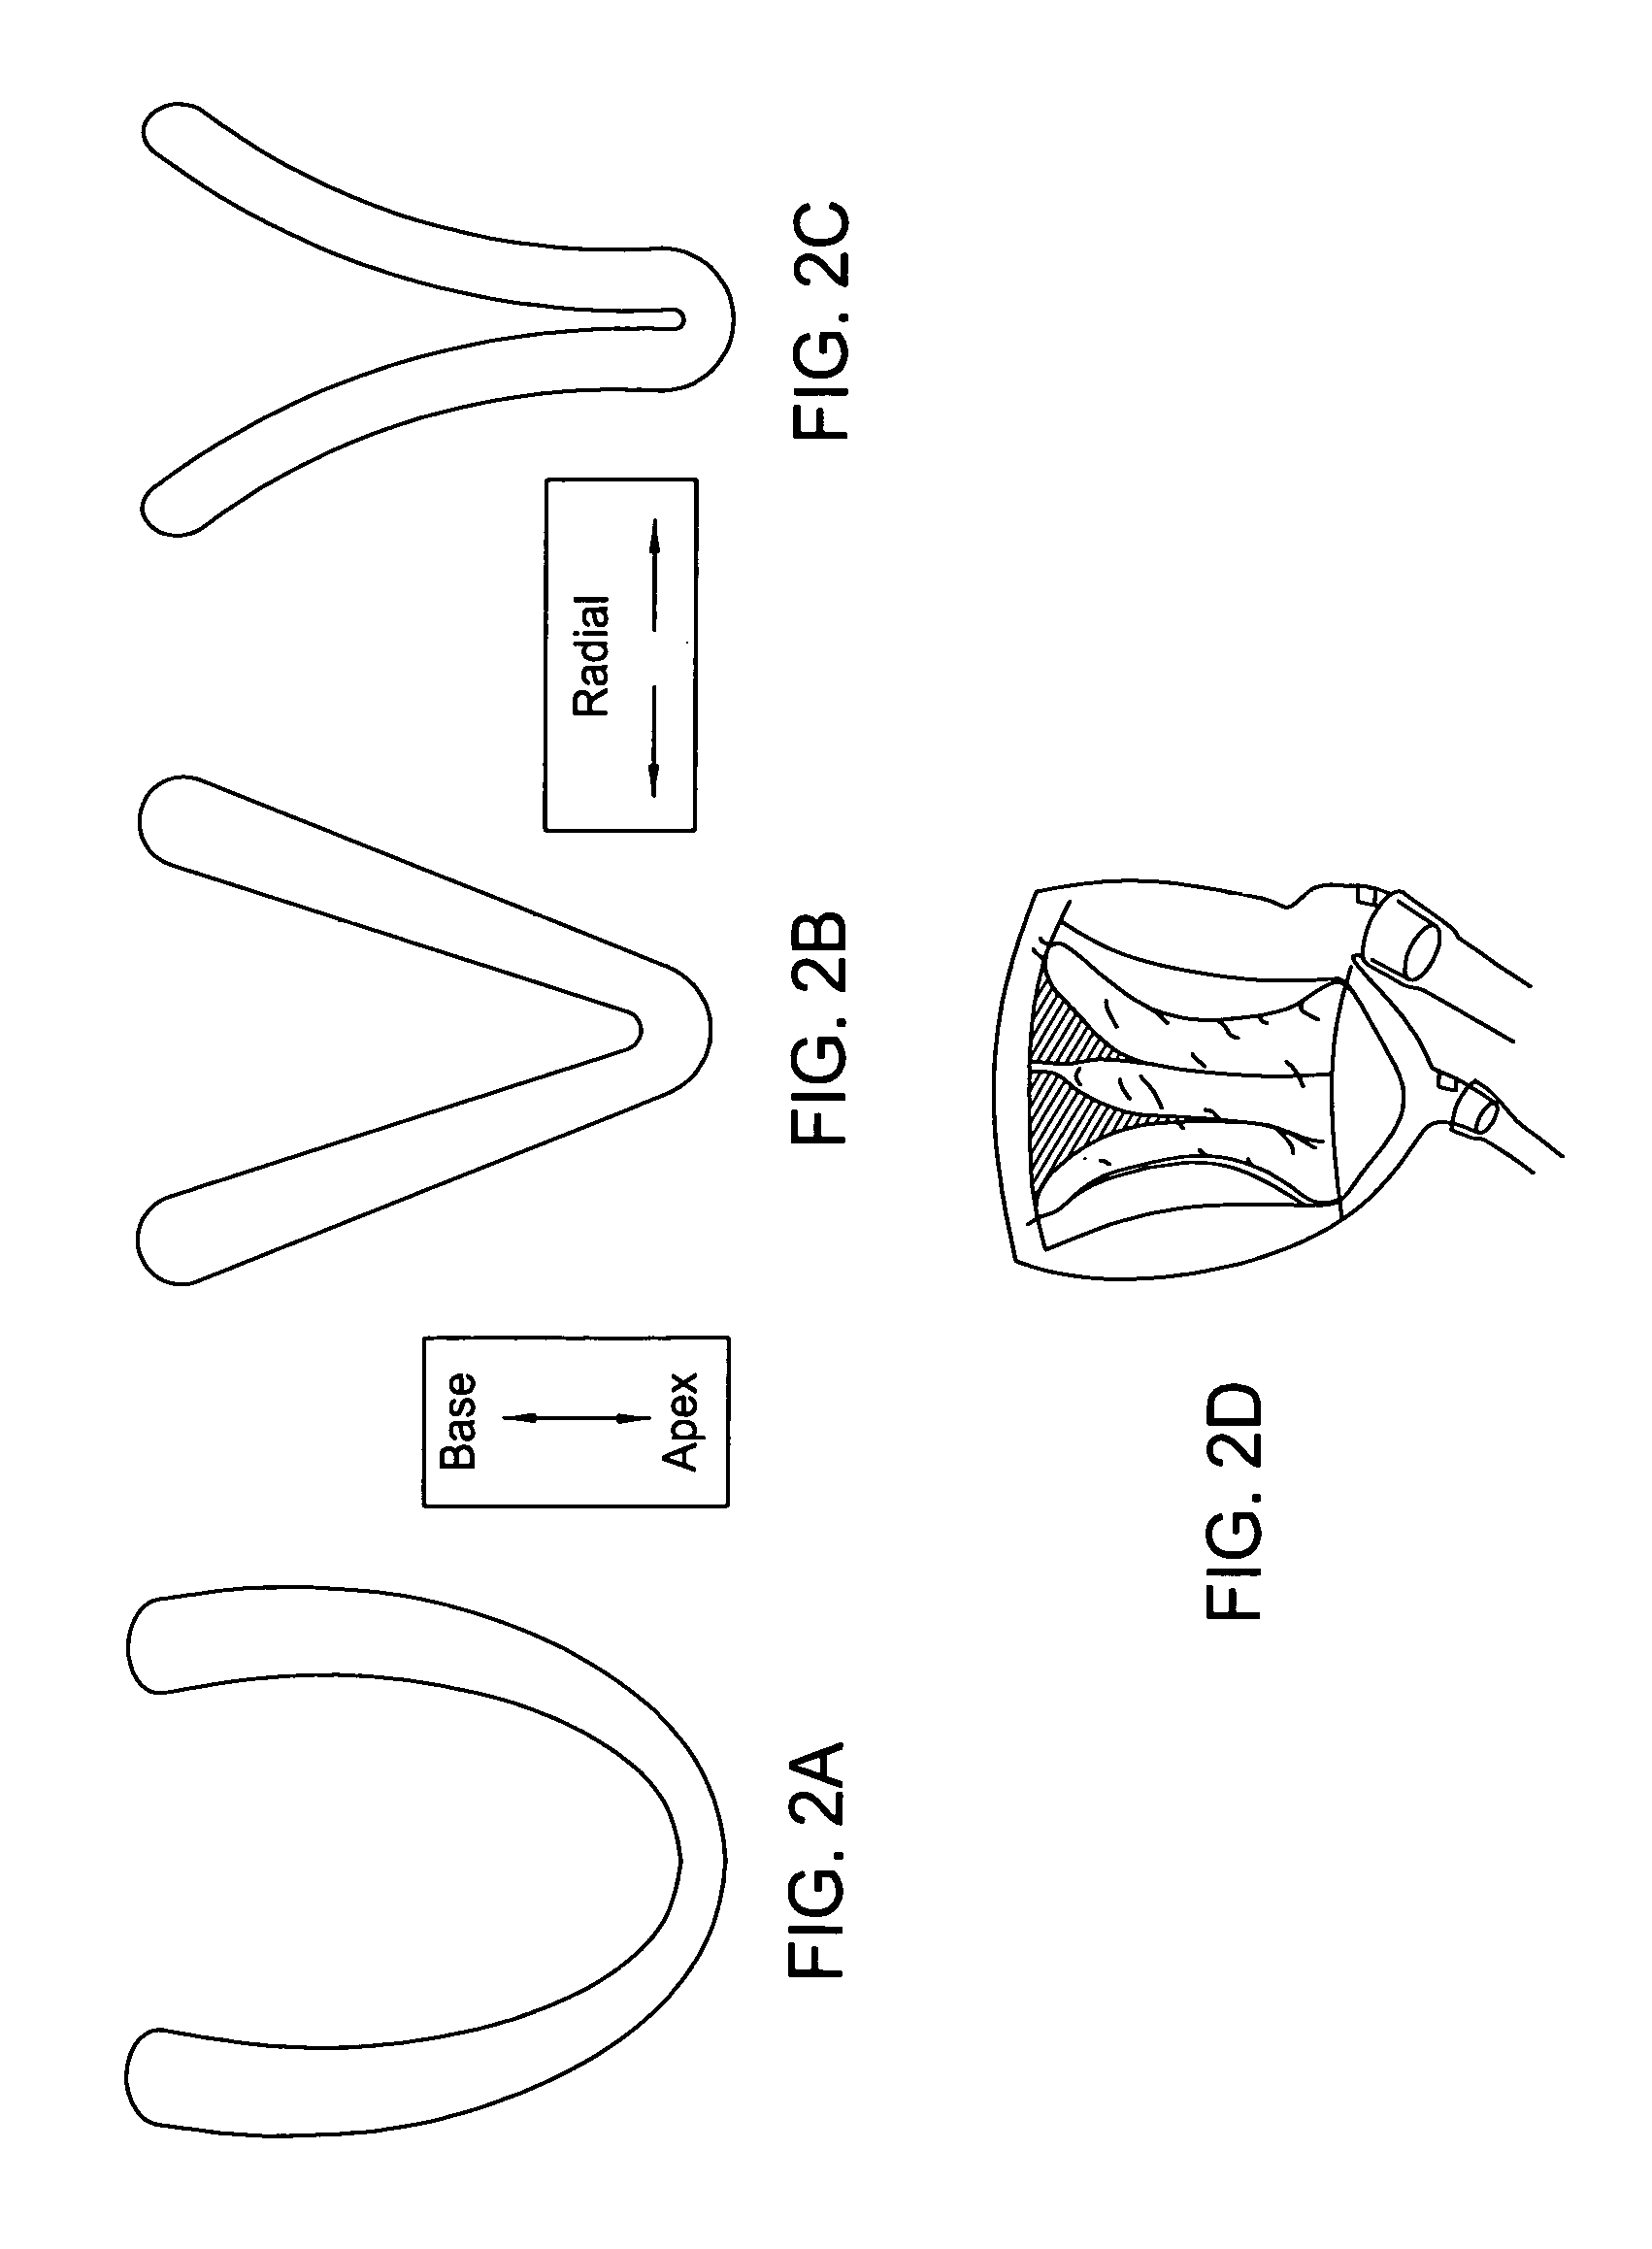 Device for proactive modulation of cardiac strain patterns